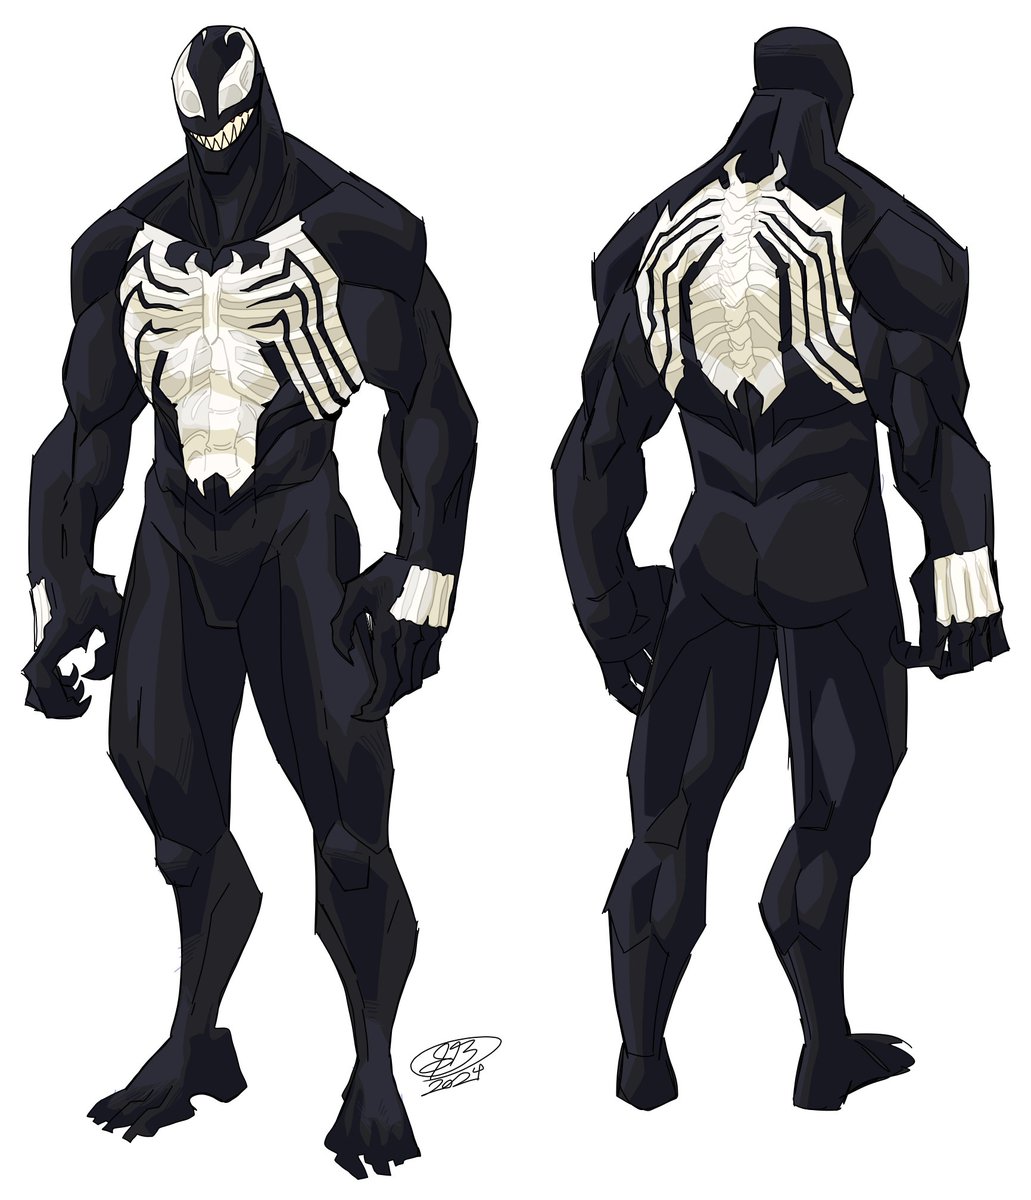 So my xenomorph fixation got me to bring back an old idea I never actually drew

Translucent accents Venom